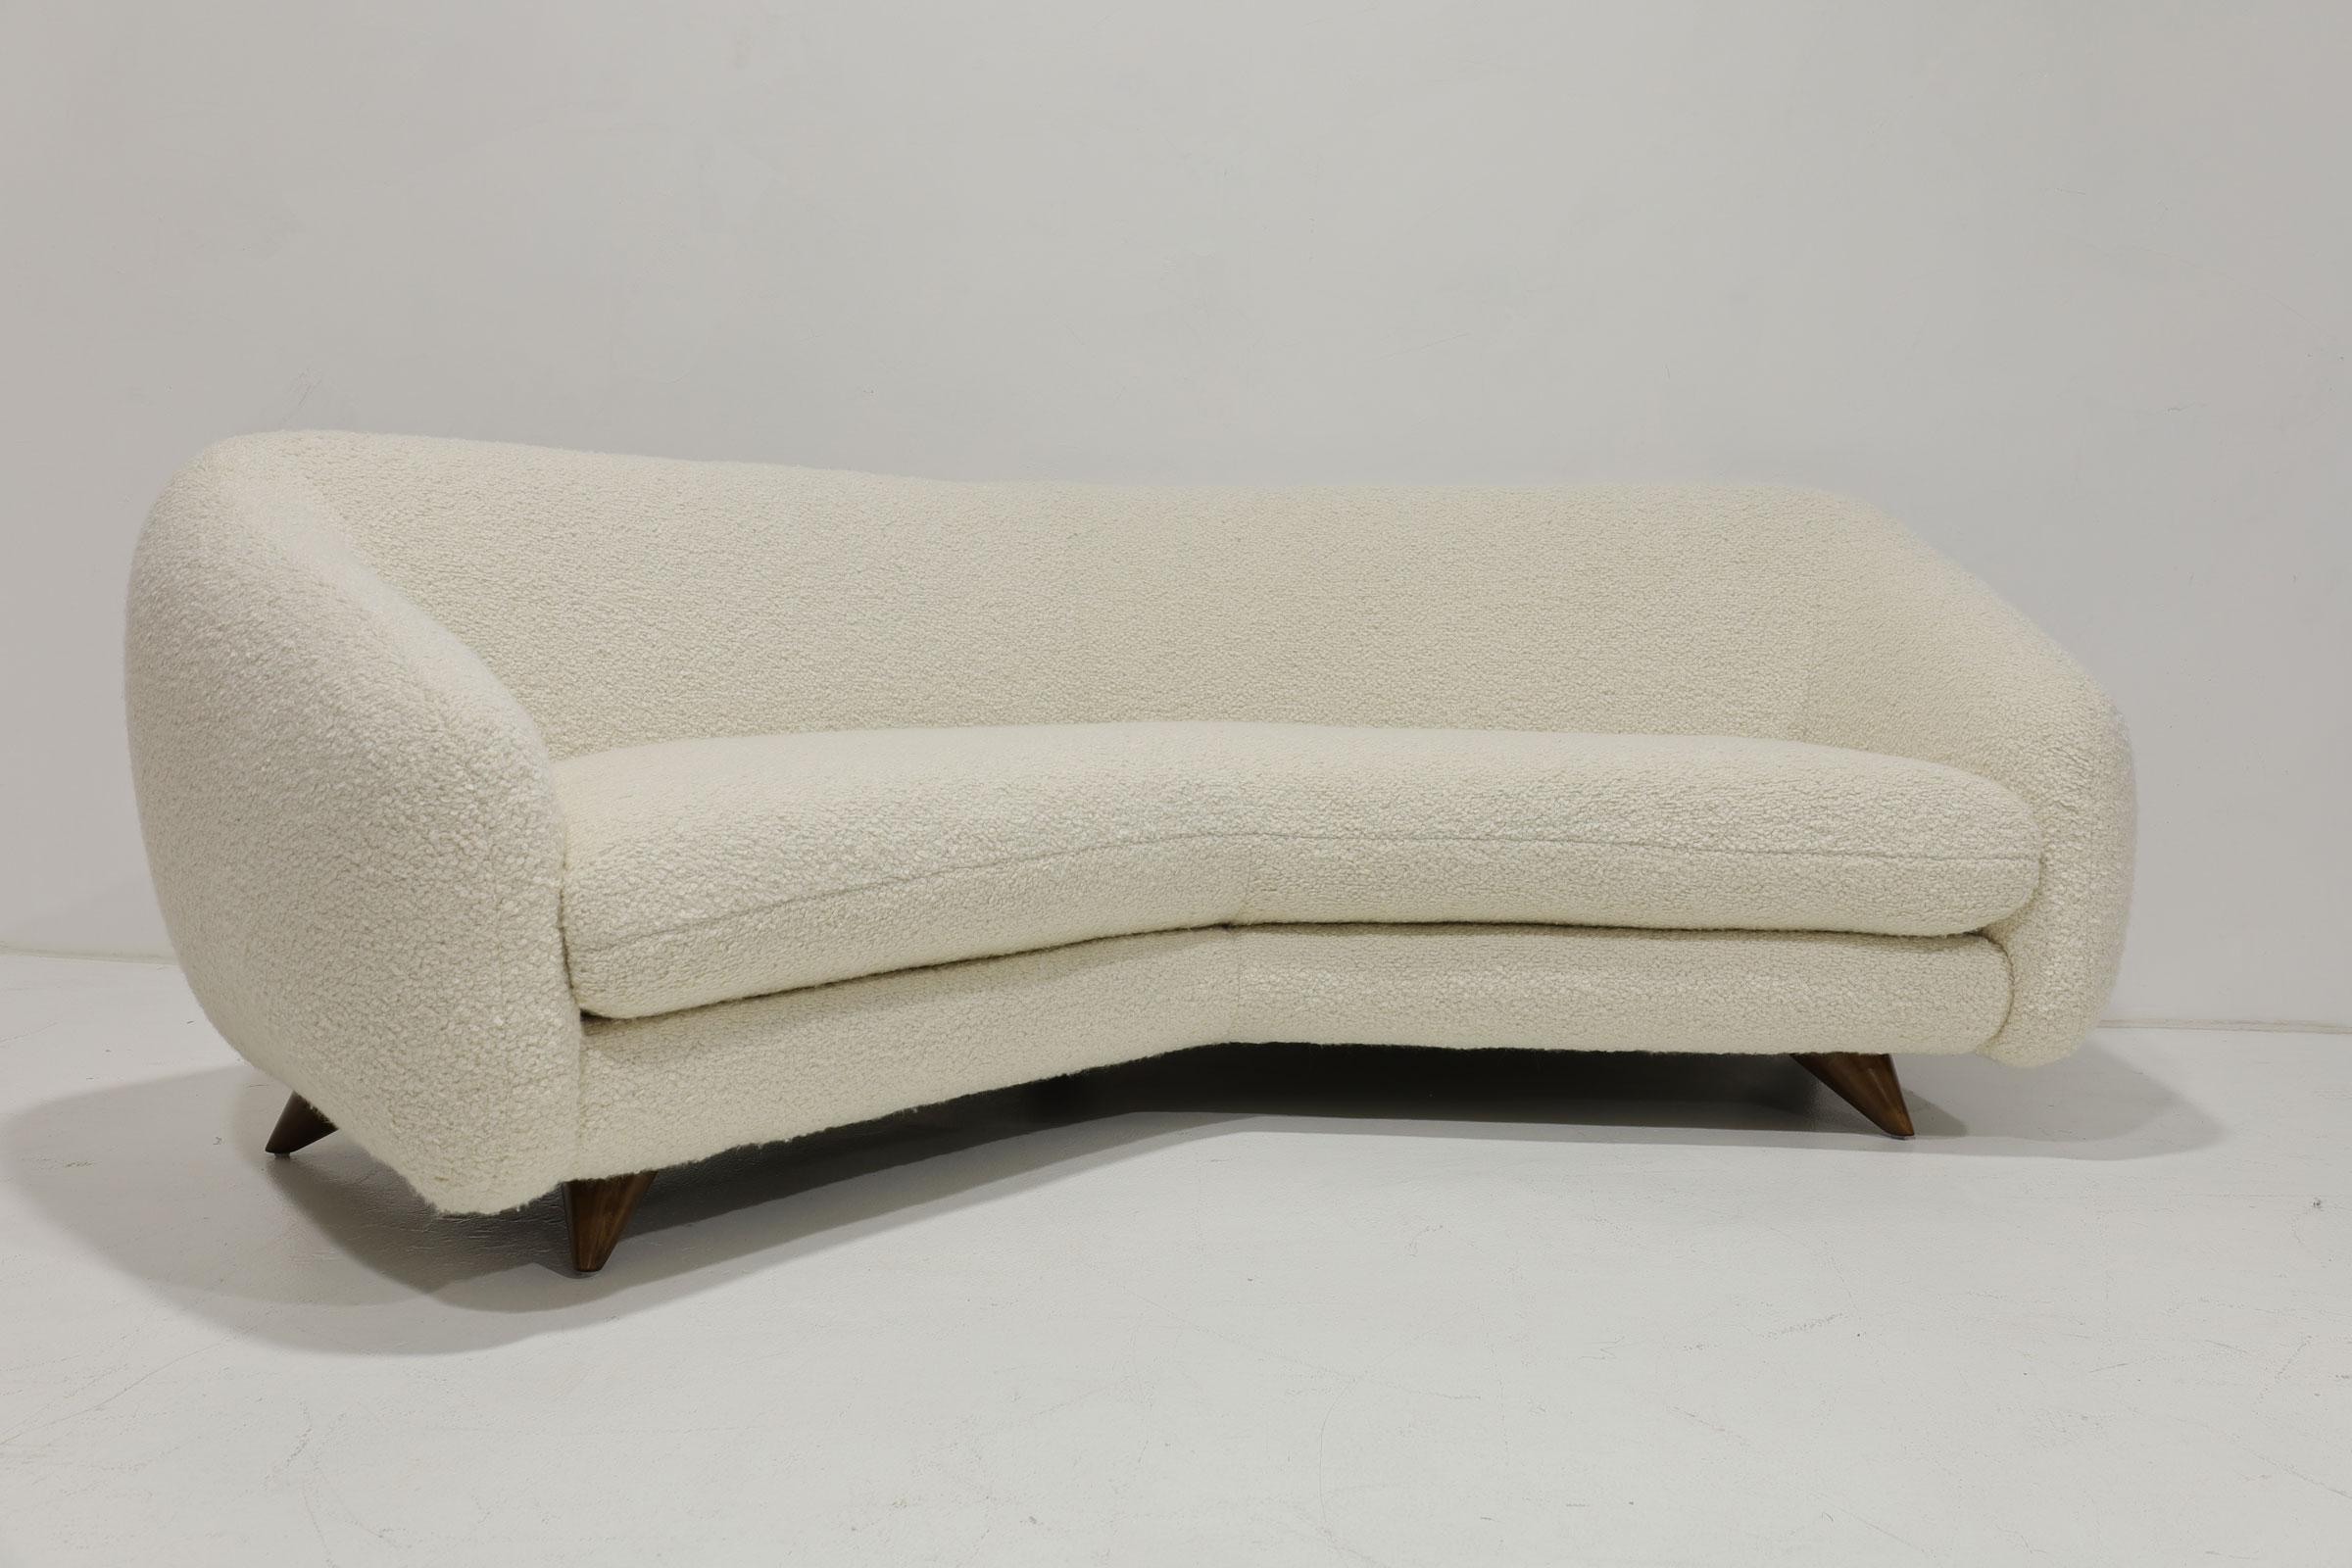 Mid-Century Modern Vladimir Kagan Wide Angle Tangent Sofa, Model 506, in Holly Hunt Teddy, 1950s For Sale